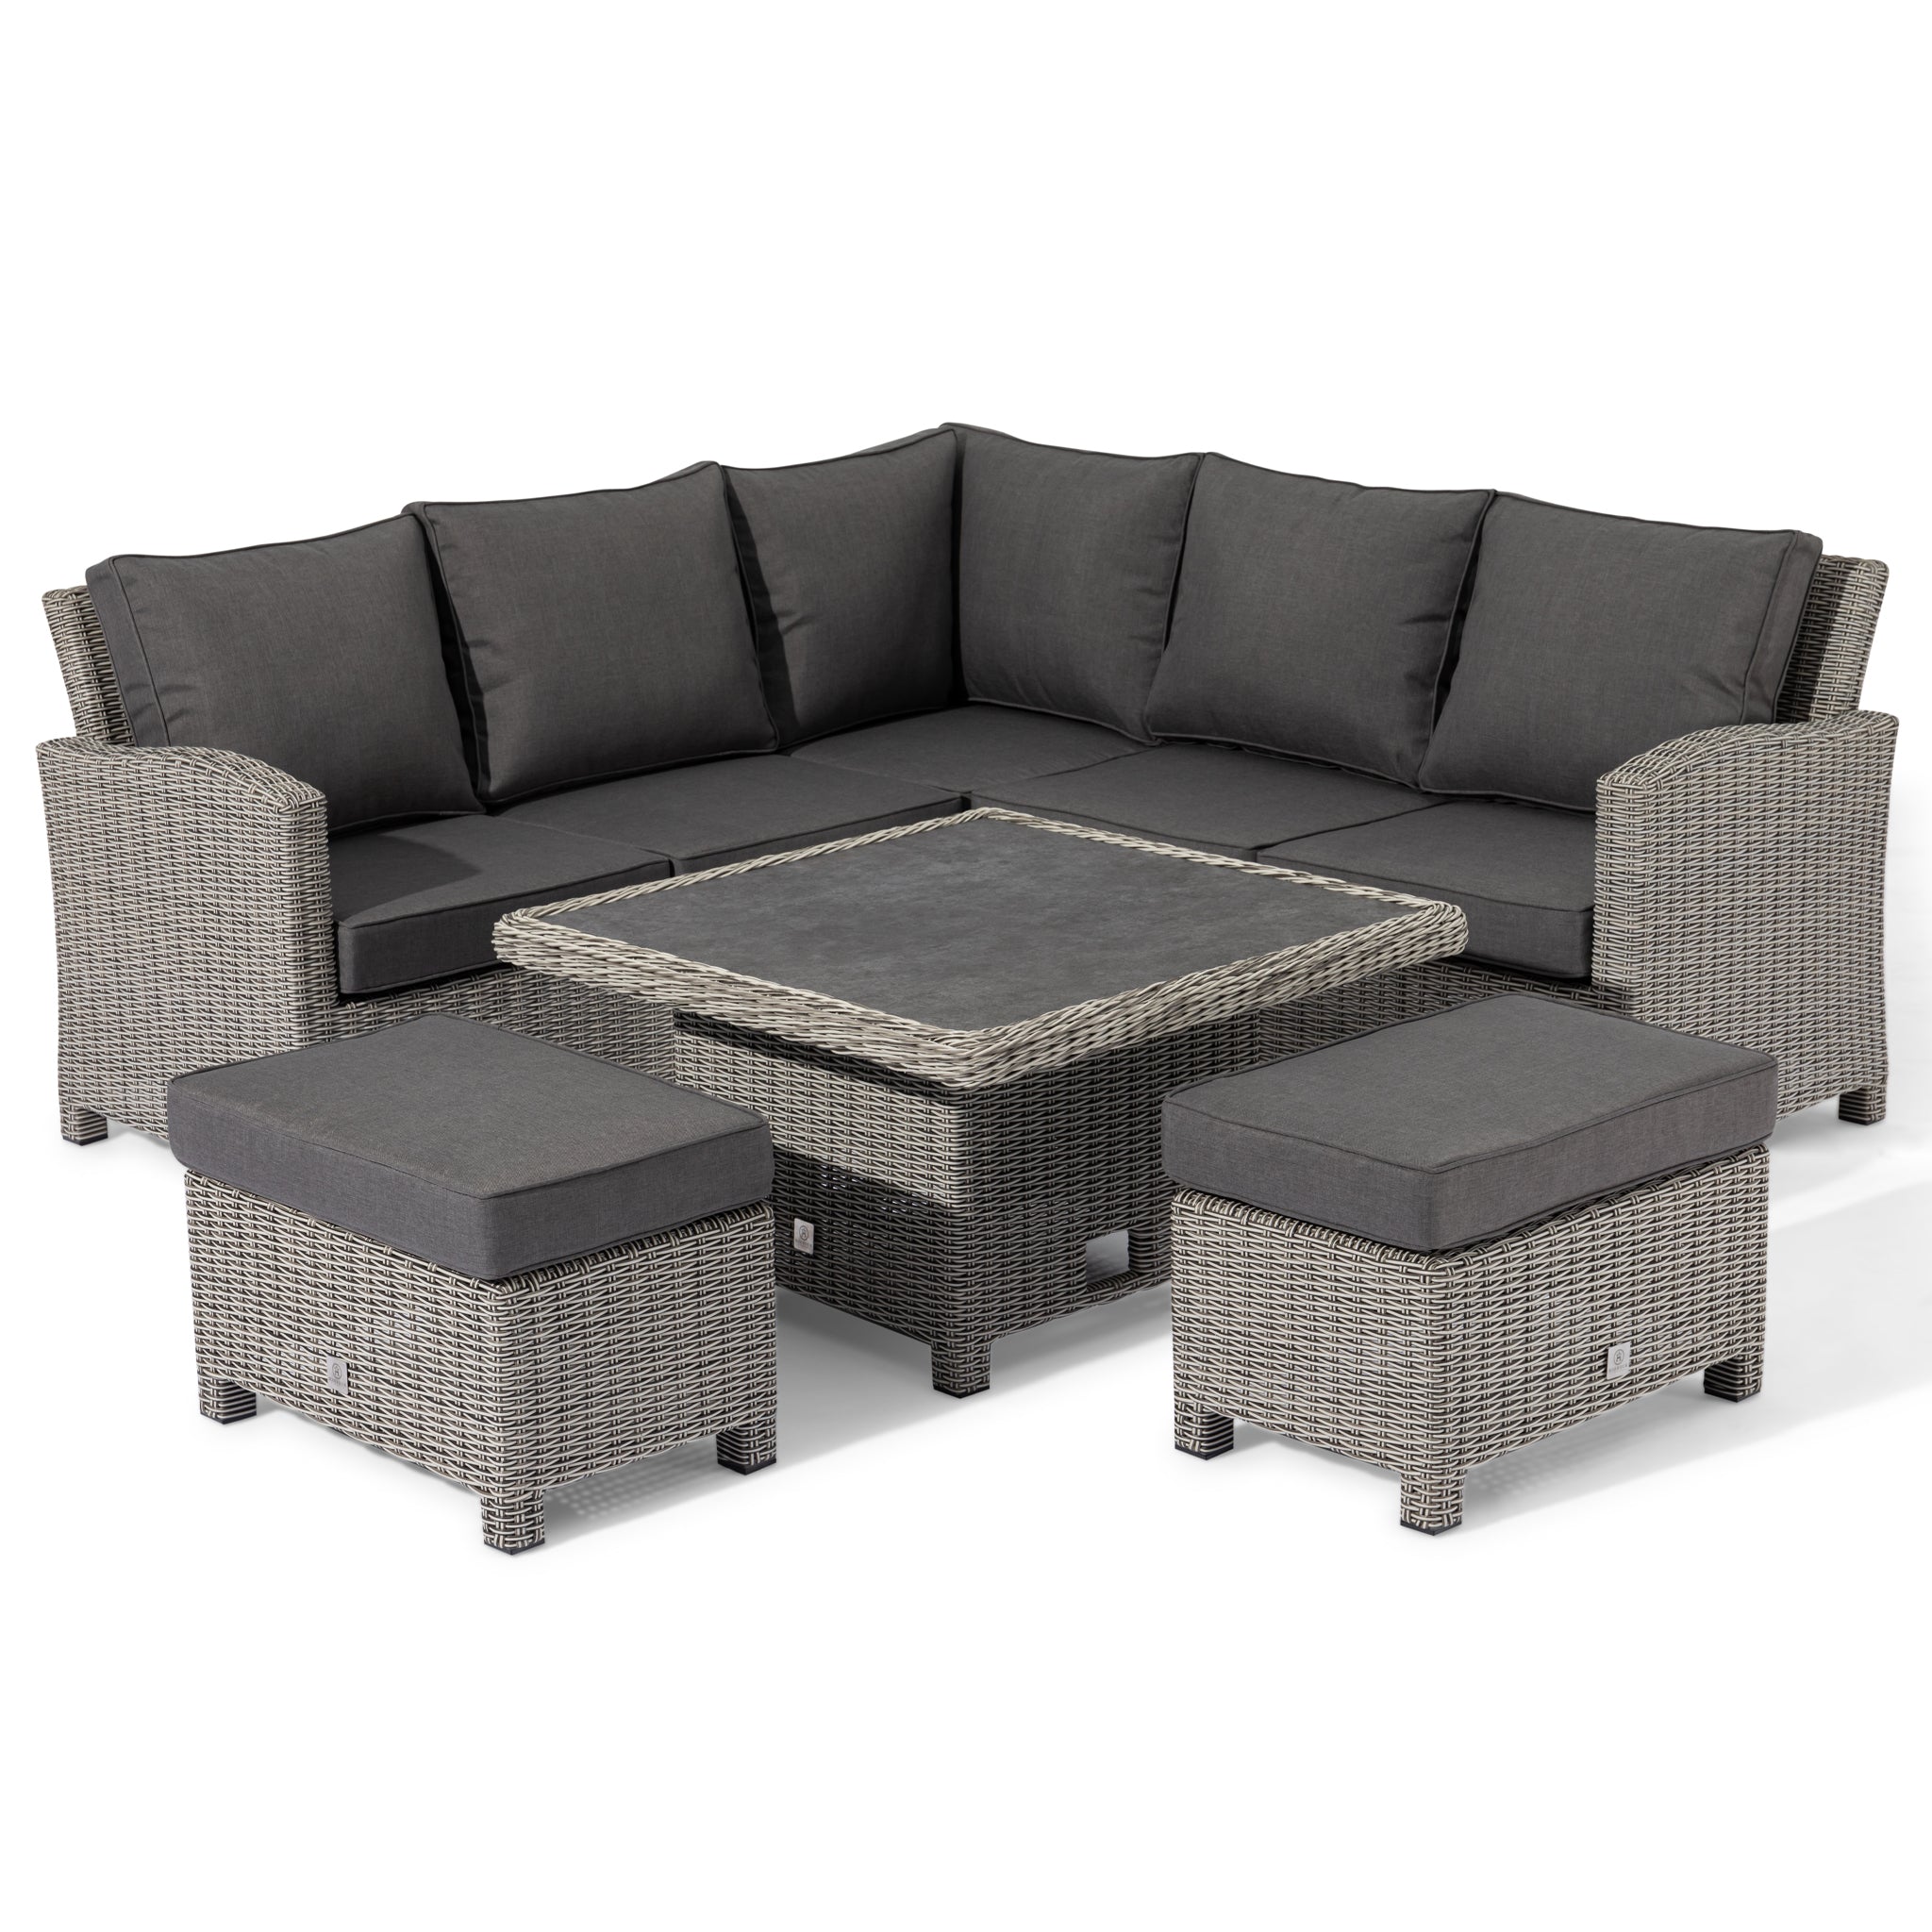 Santiago Square Rattan Corner Dining Set with Rising Table in Grey